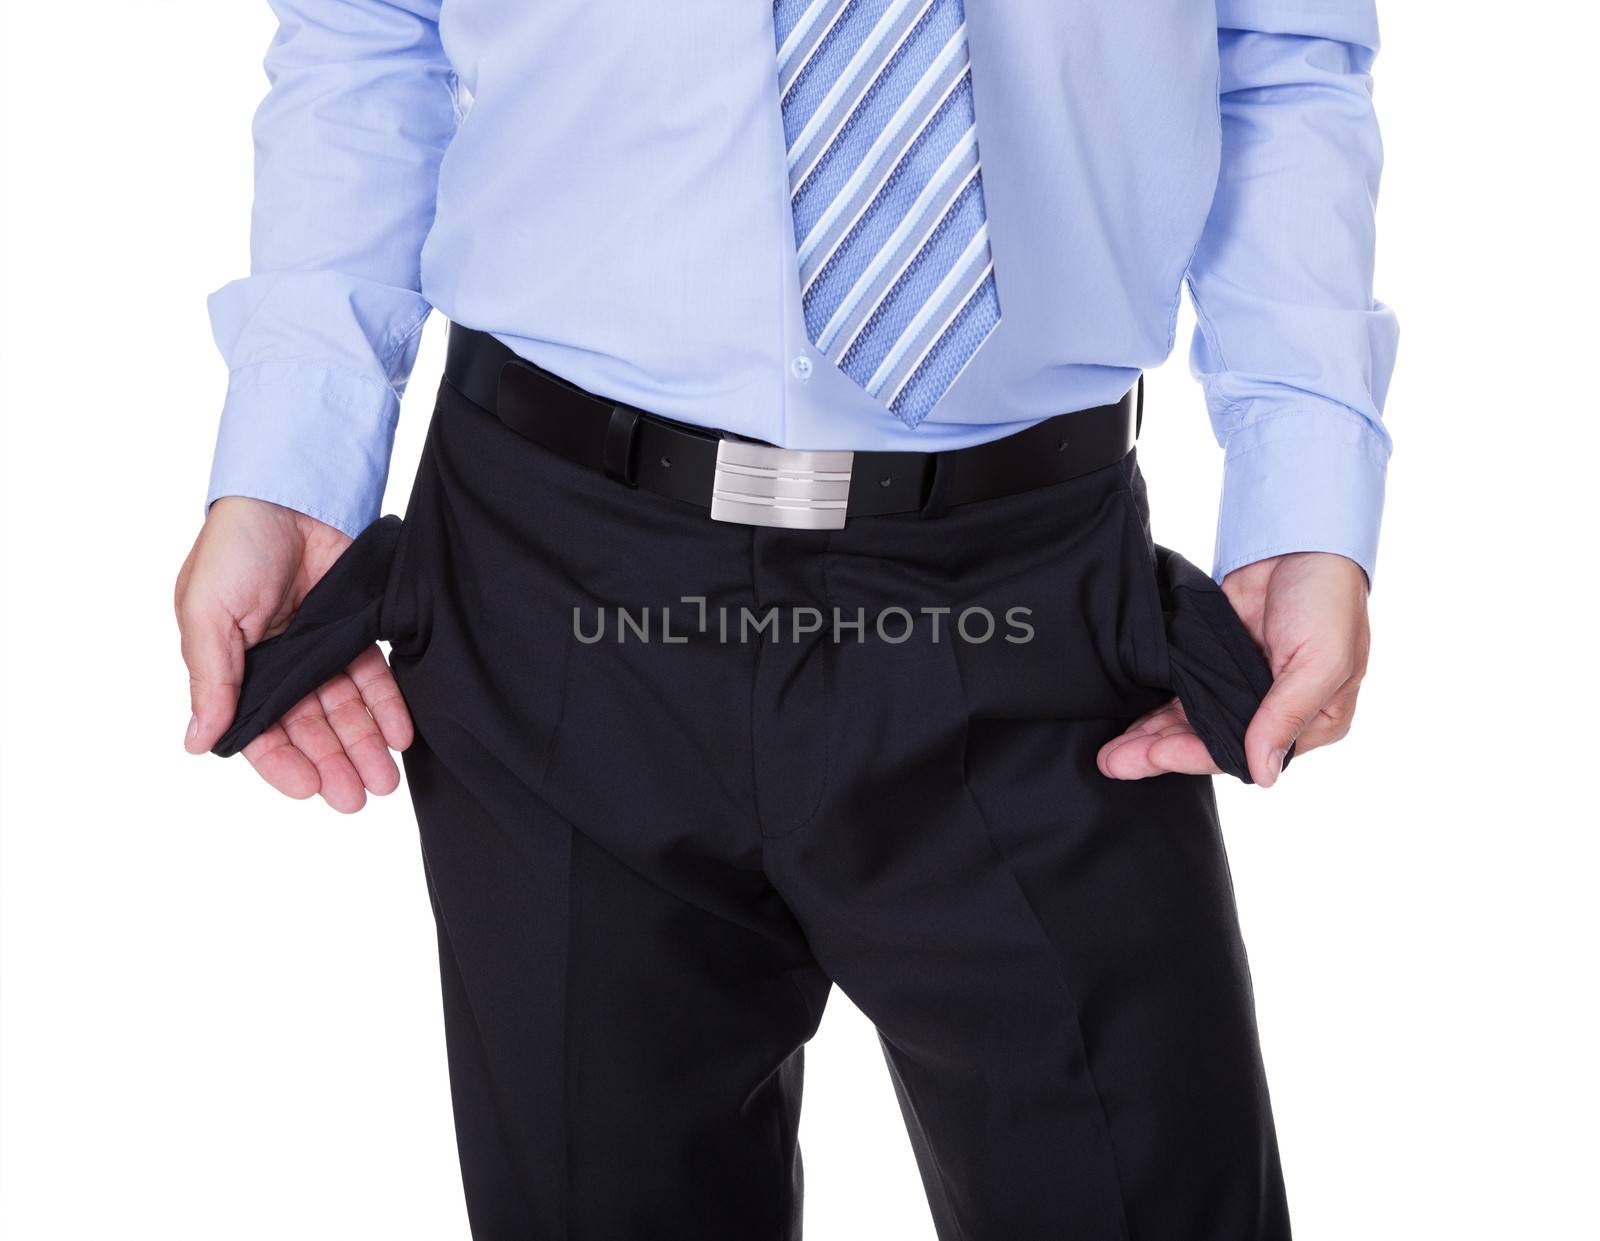 Businessman Showing Empty Pockets On White Backgrounds